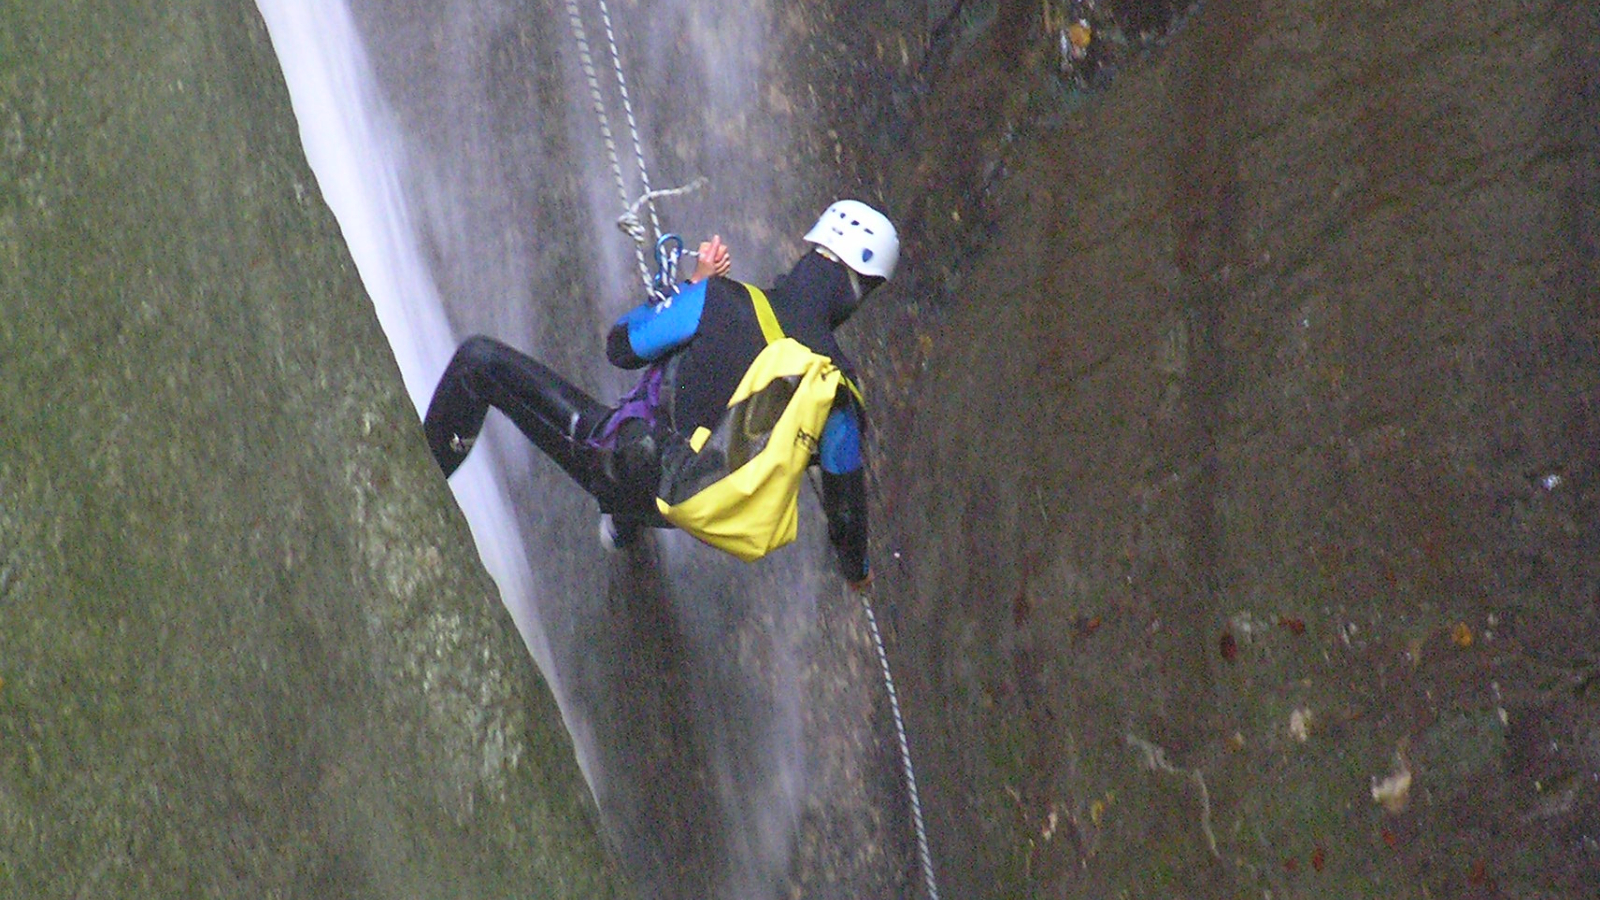 Canyoning avec un guide